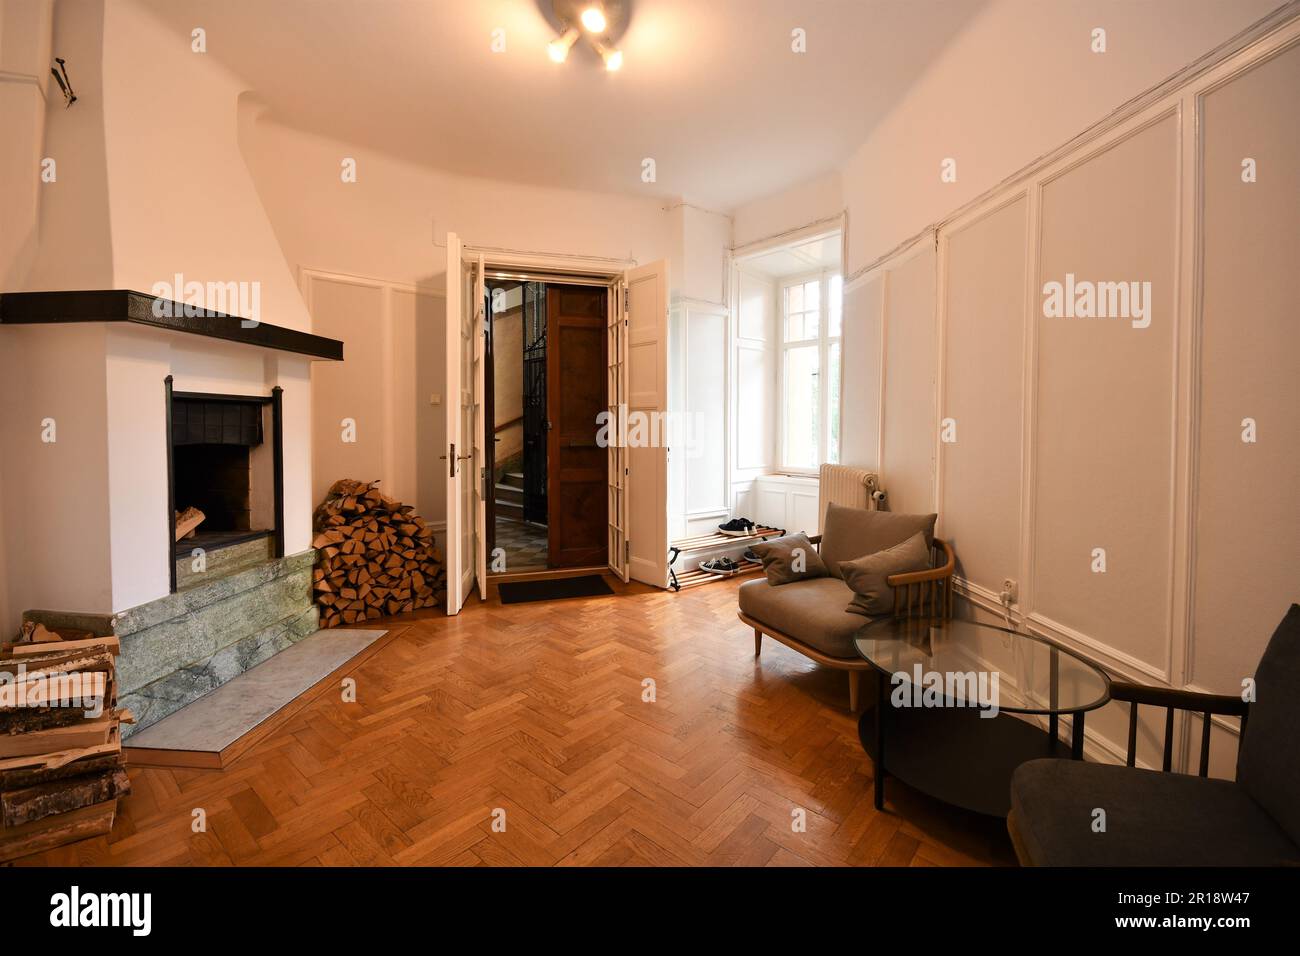 A cozy living room featuring a fireplace with cozy sofas Stock Photo